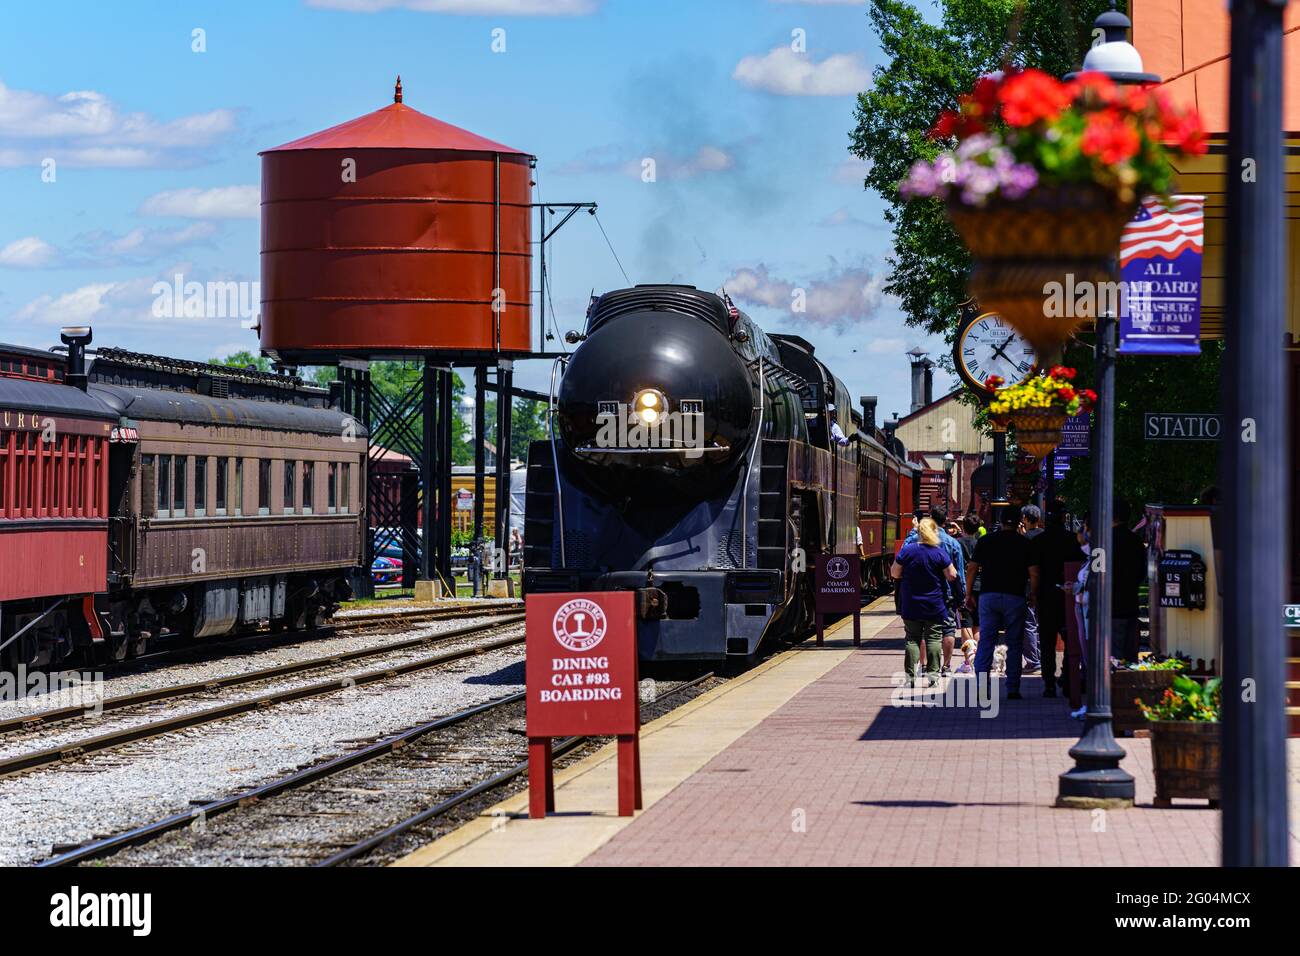 Strasburg, PA, USA - May 31, 2021: The Norfolk and Western Class J 611, the sole survivor of 14 Class J steam locomotives, pulls into the historic Str Stock Photo